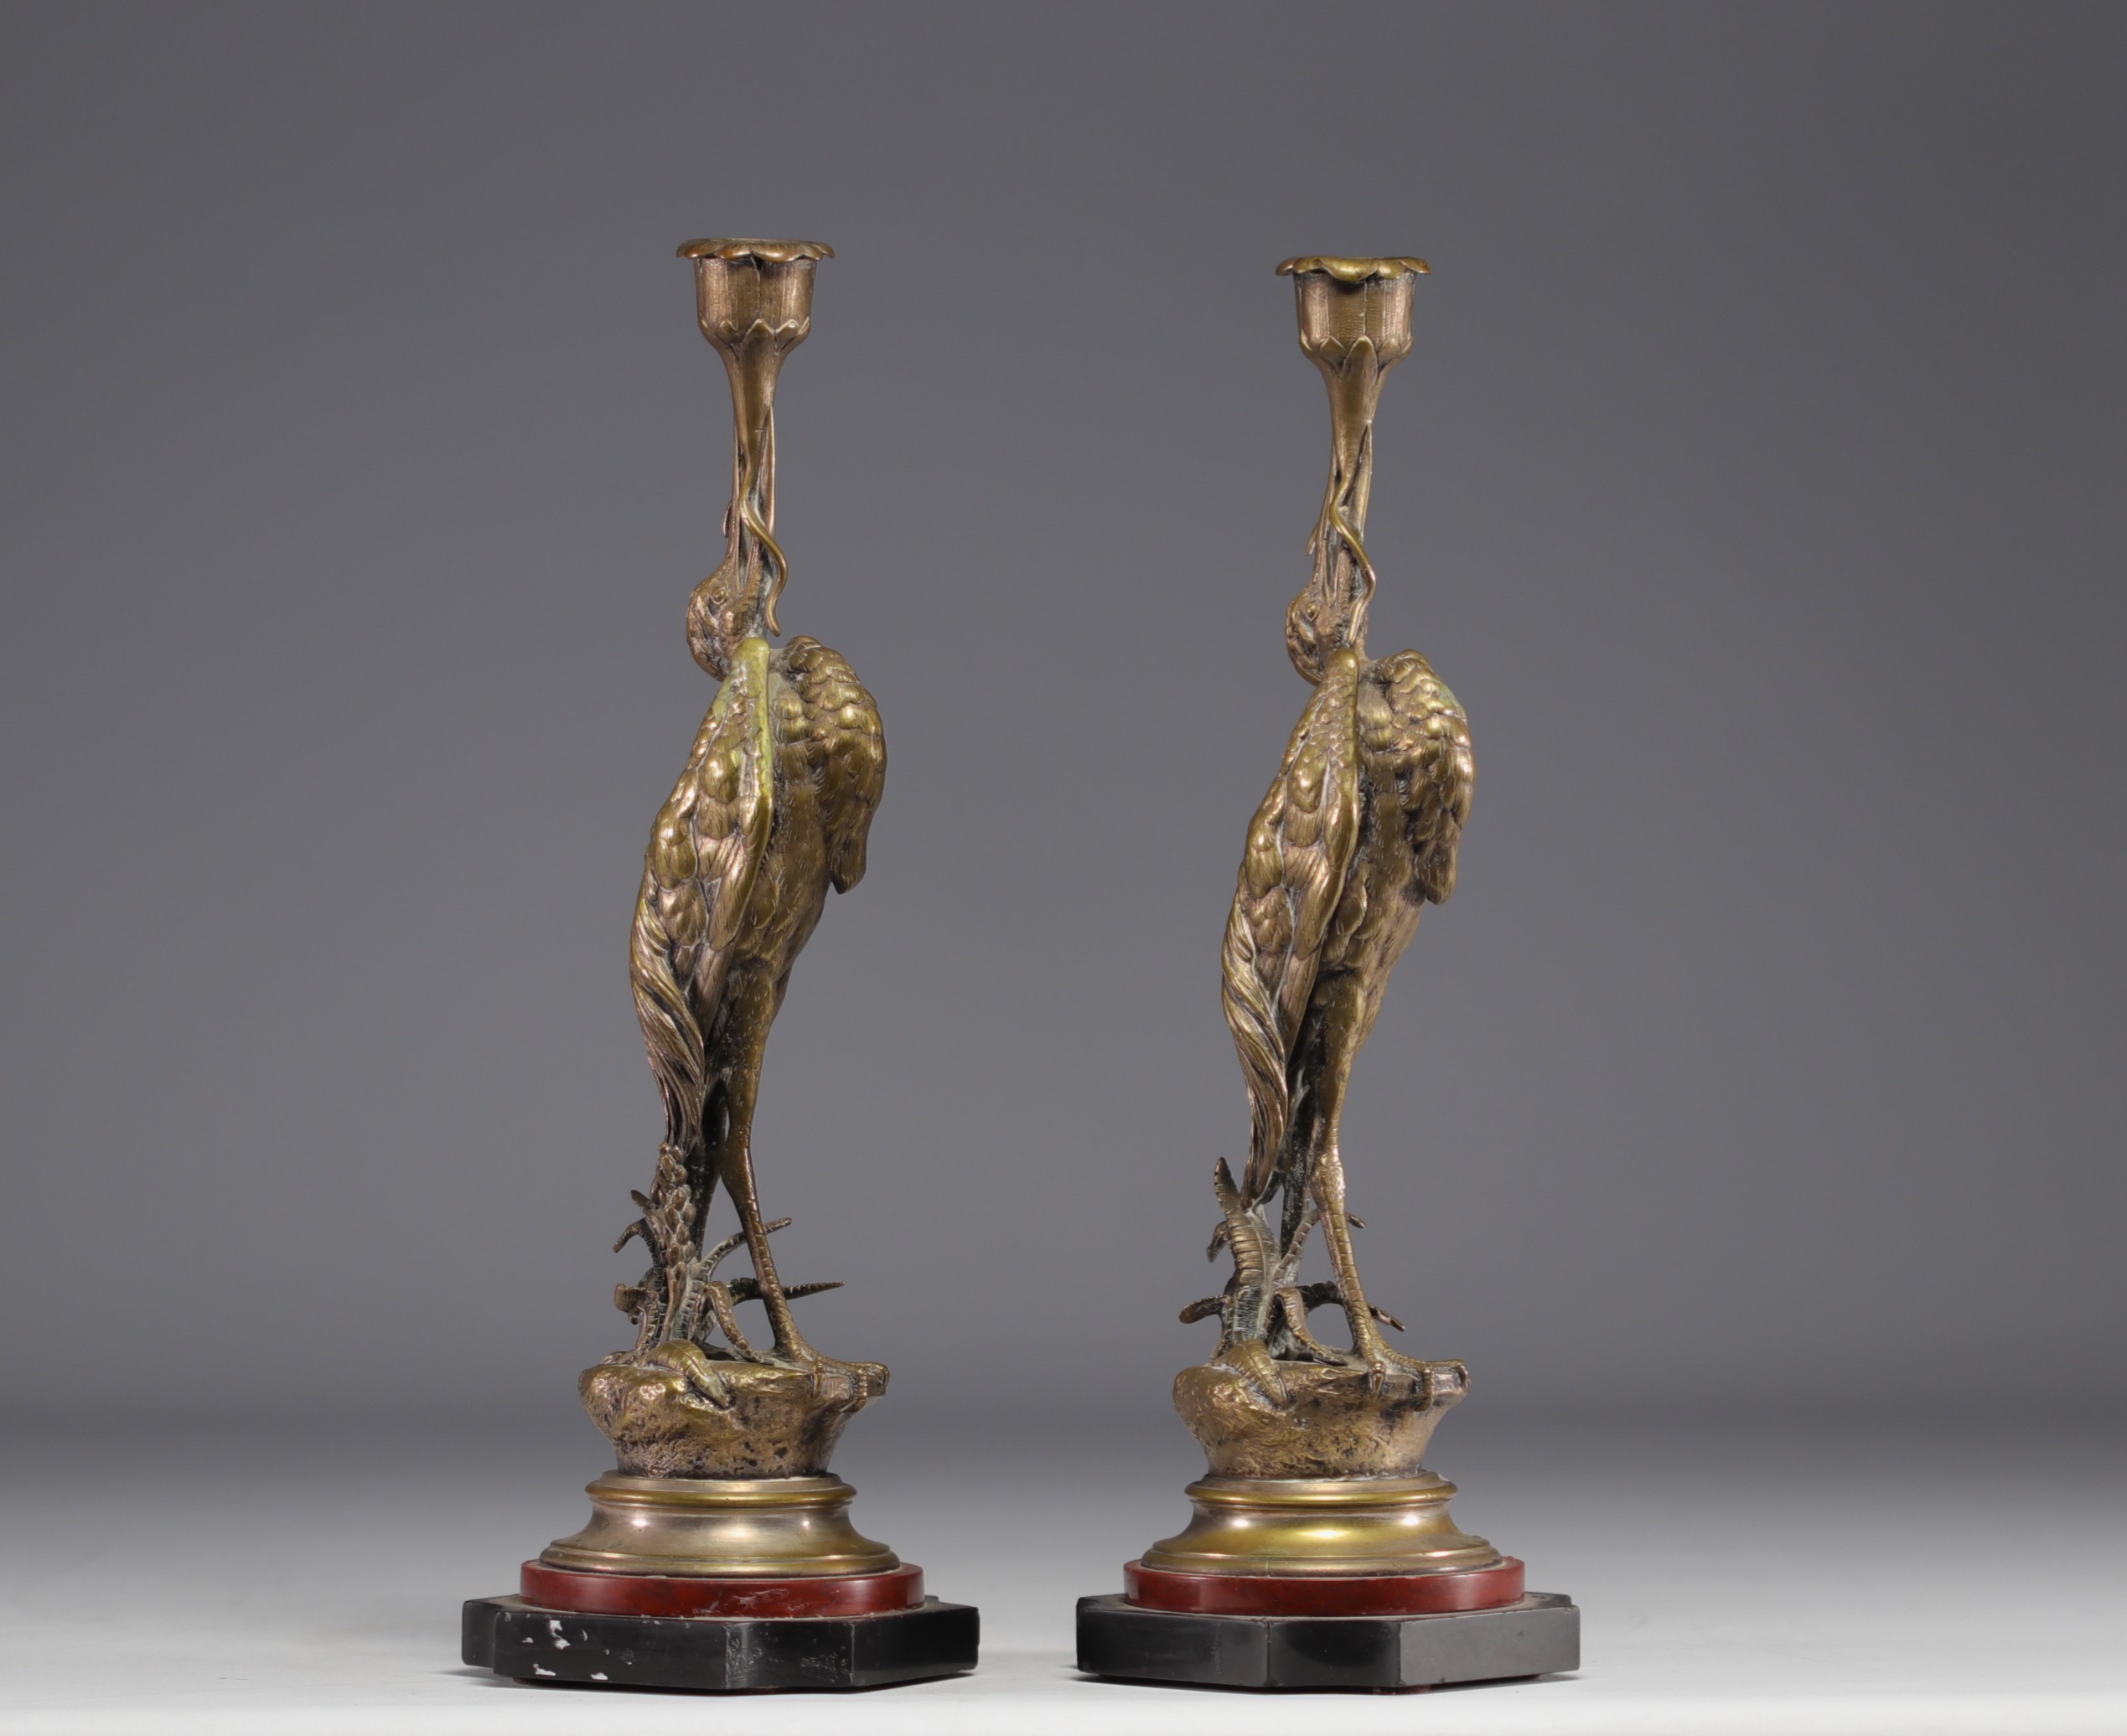 Jules MOIGNIEZ (1835-1894) "Les echassiers" Pair of bronze candlesticks. - Image 2 of 5